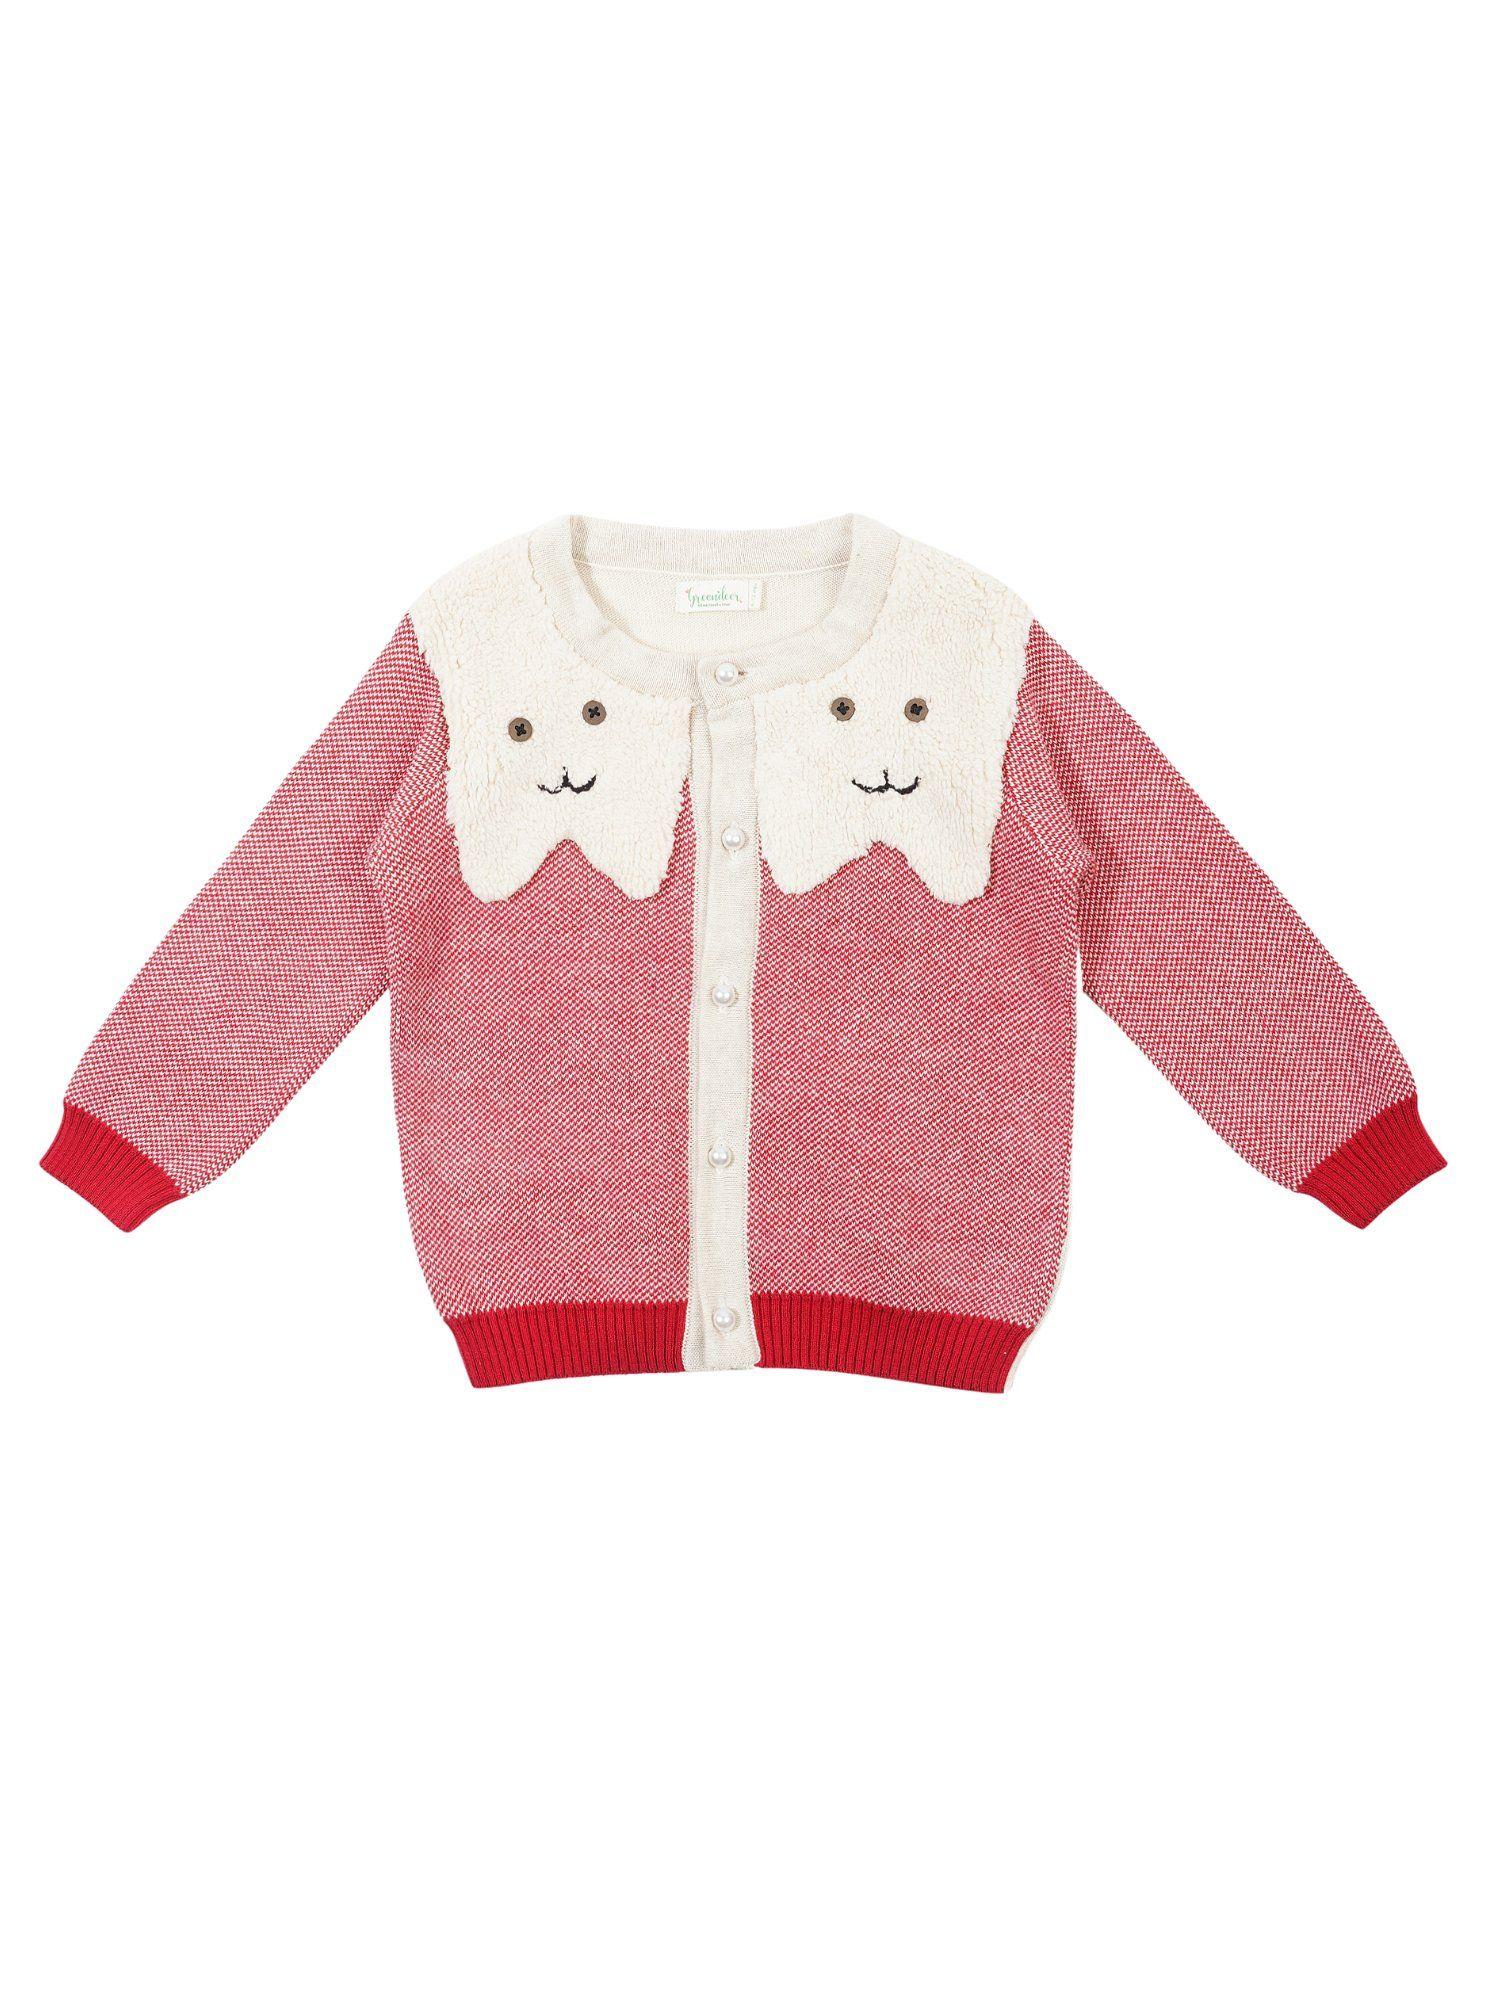 wiskers jacquard sweater cotton skin friendly red